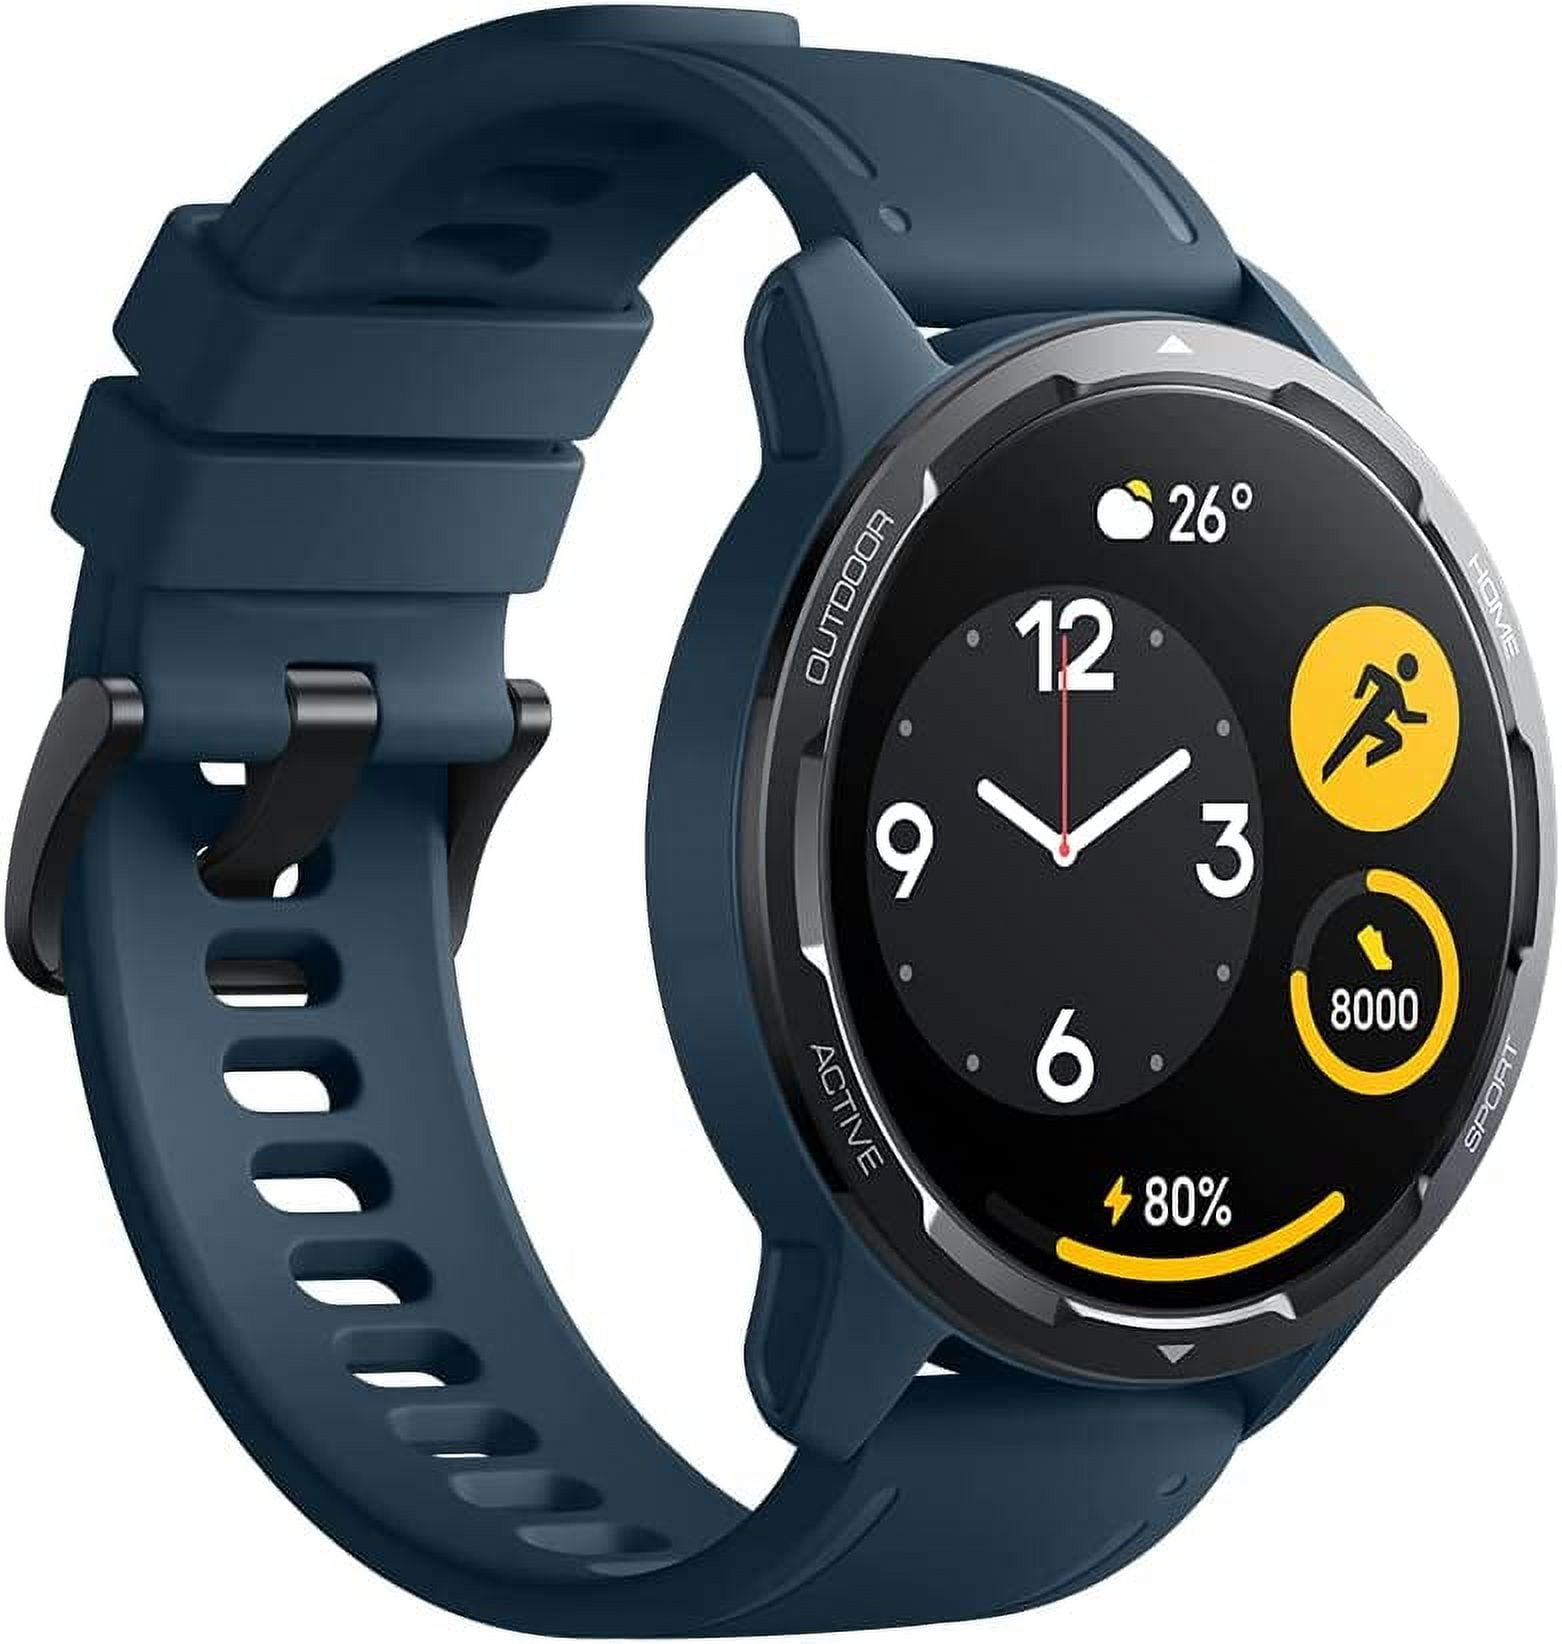 Xiaomi Watch S1 Active, 1.43 AMOLED Display, 117 Fitness Modes, 19  Professional Modes, 200+ Watch Faces, Exquisite Metal Bezel, Dual-Band GPS,  12 Days of Battery Life, Bluetooth Phone Call, Blue 